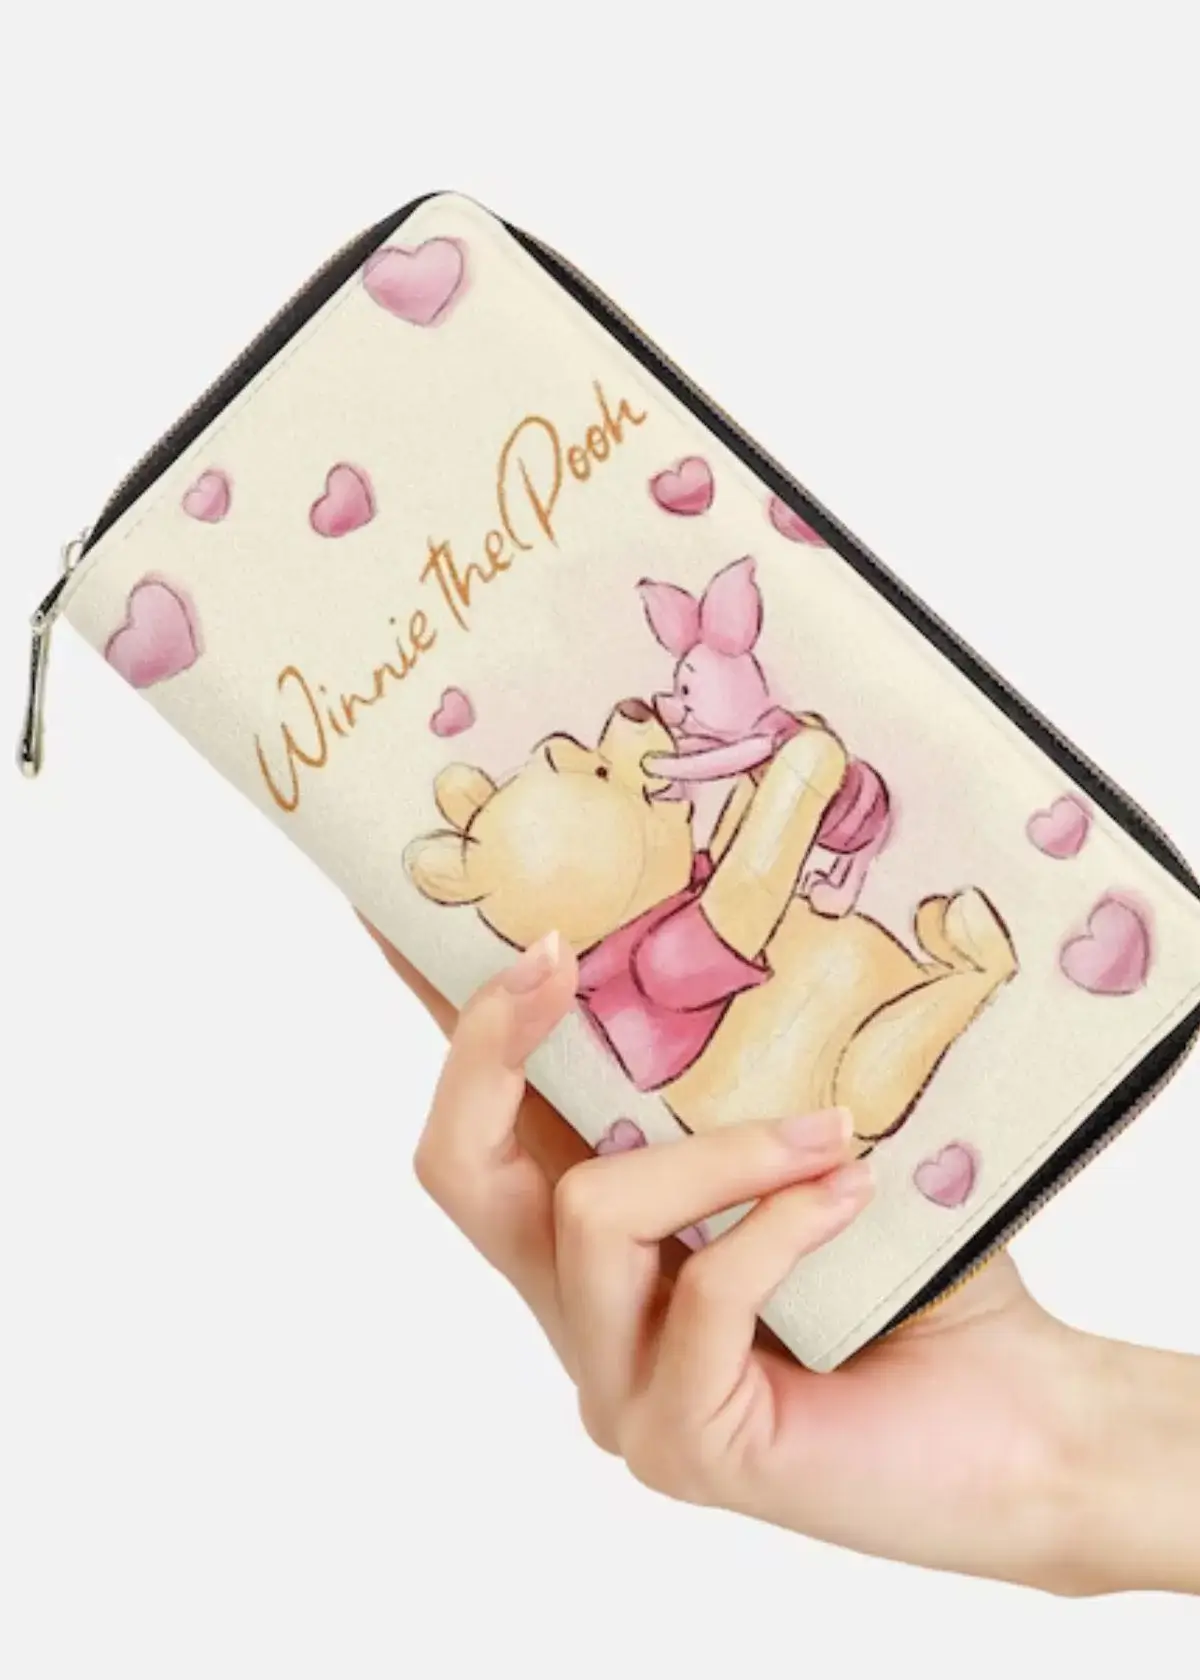 How to choose the right Winnie the Pooh wallet?